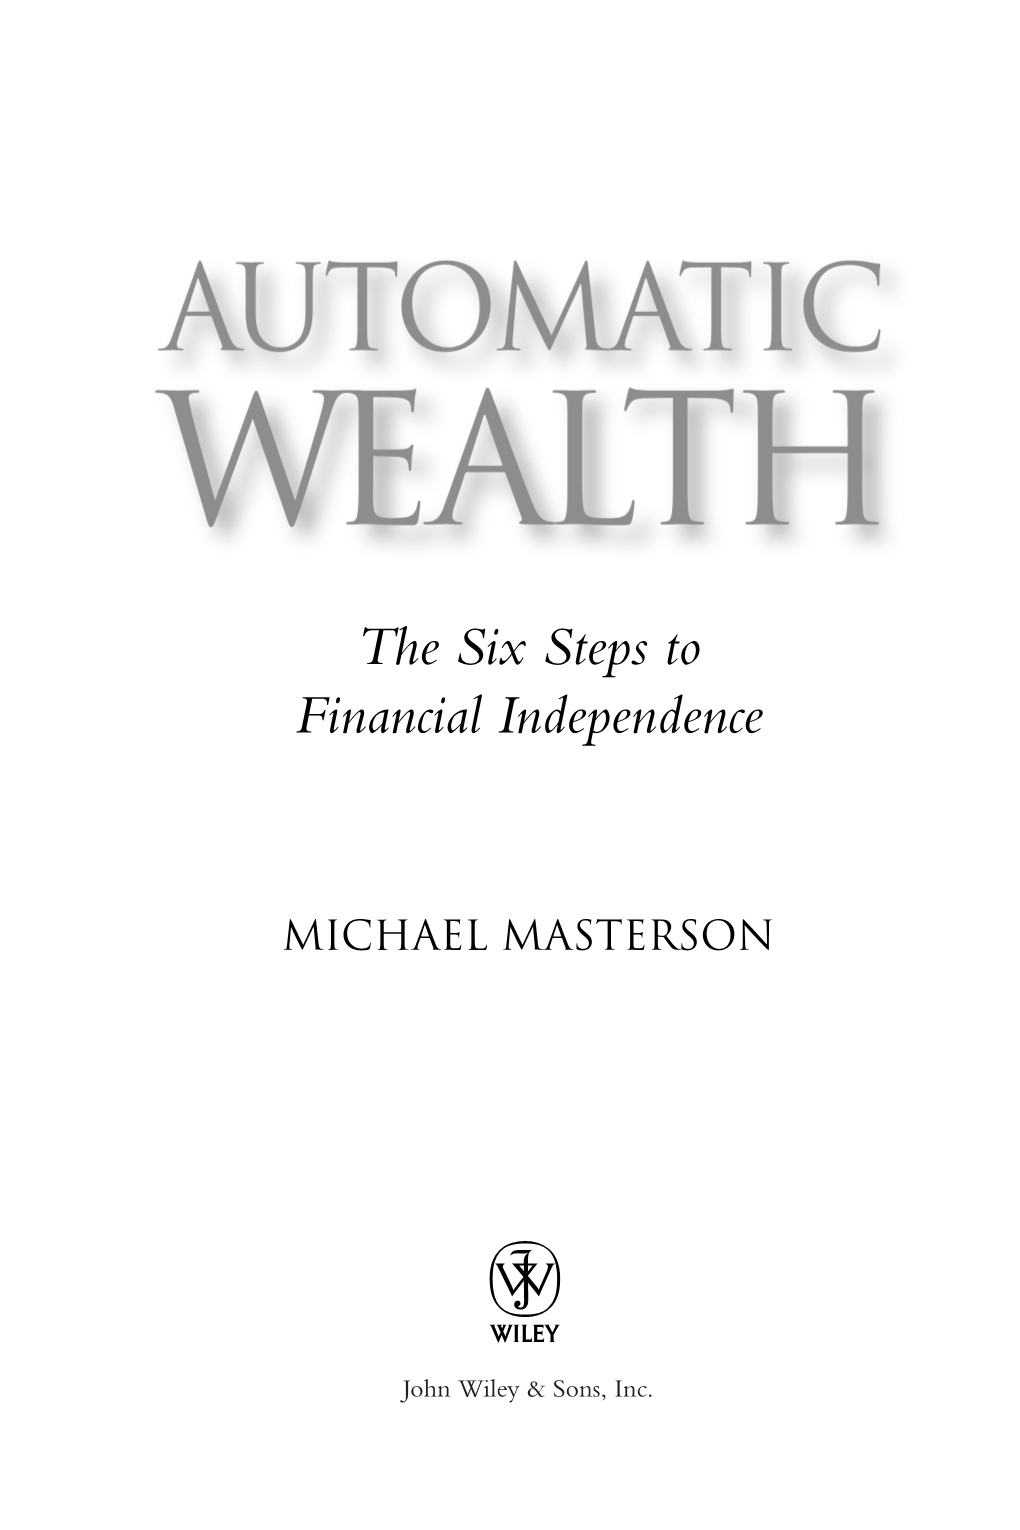 The Six Steps to Financial Independence